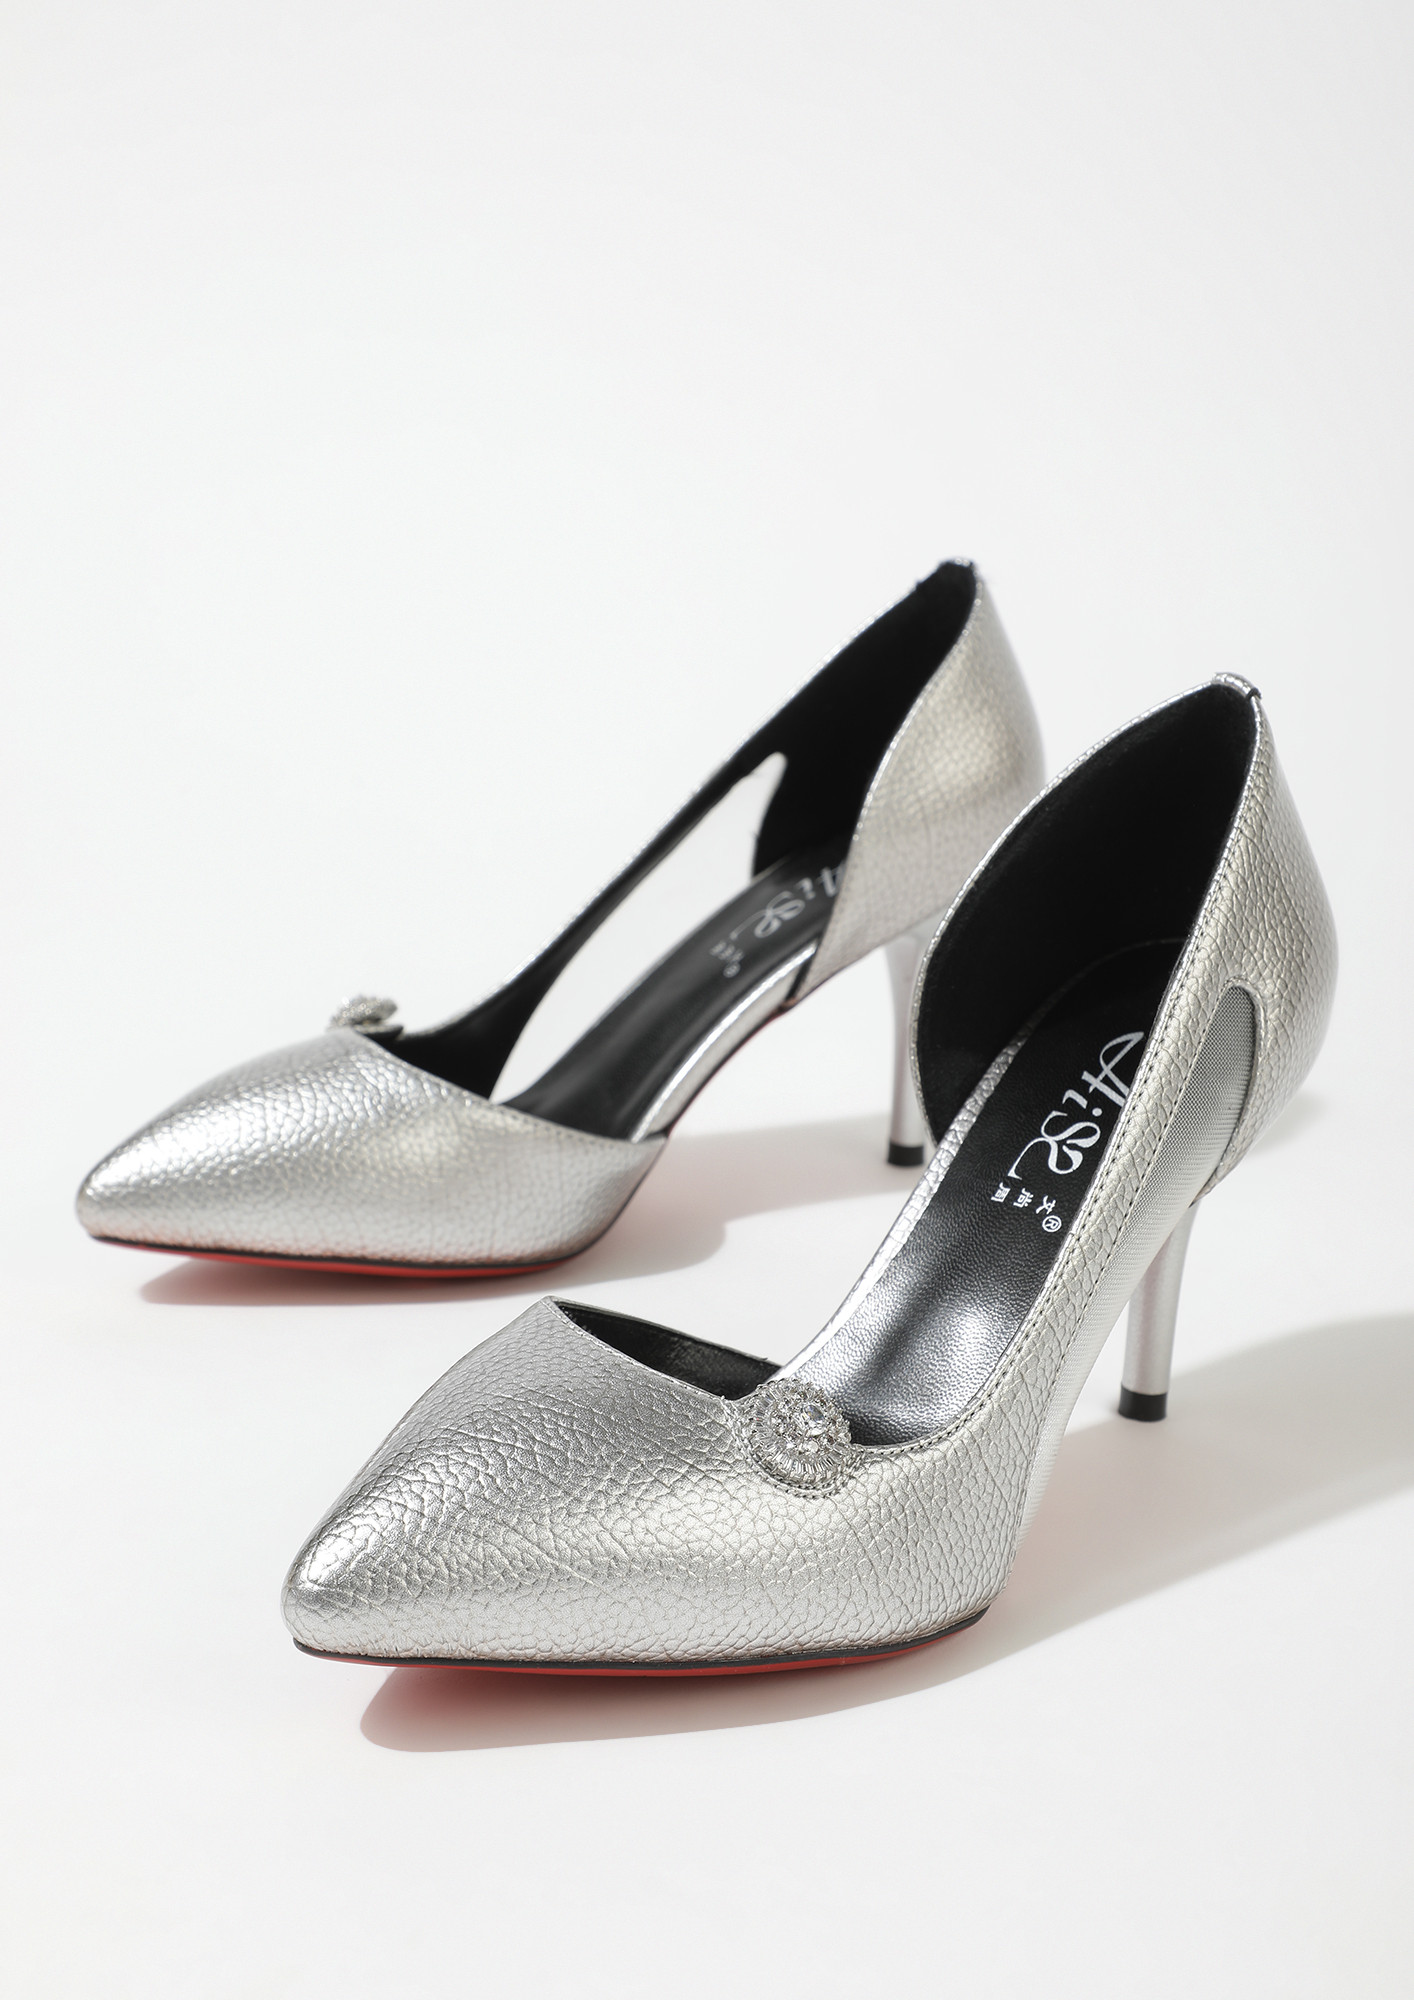 FINDERS KEEPERS SILVER PUMPS